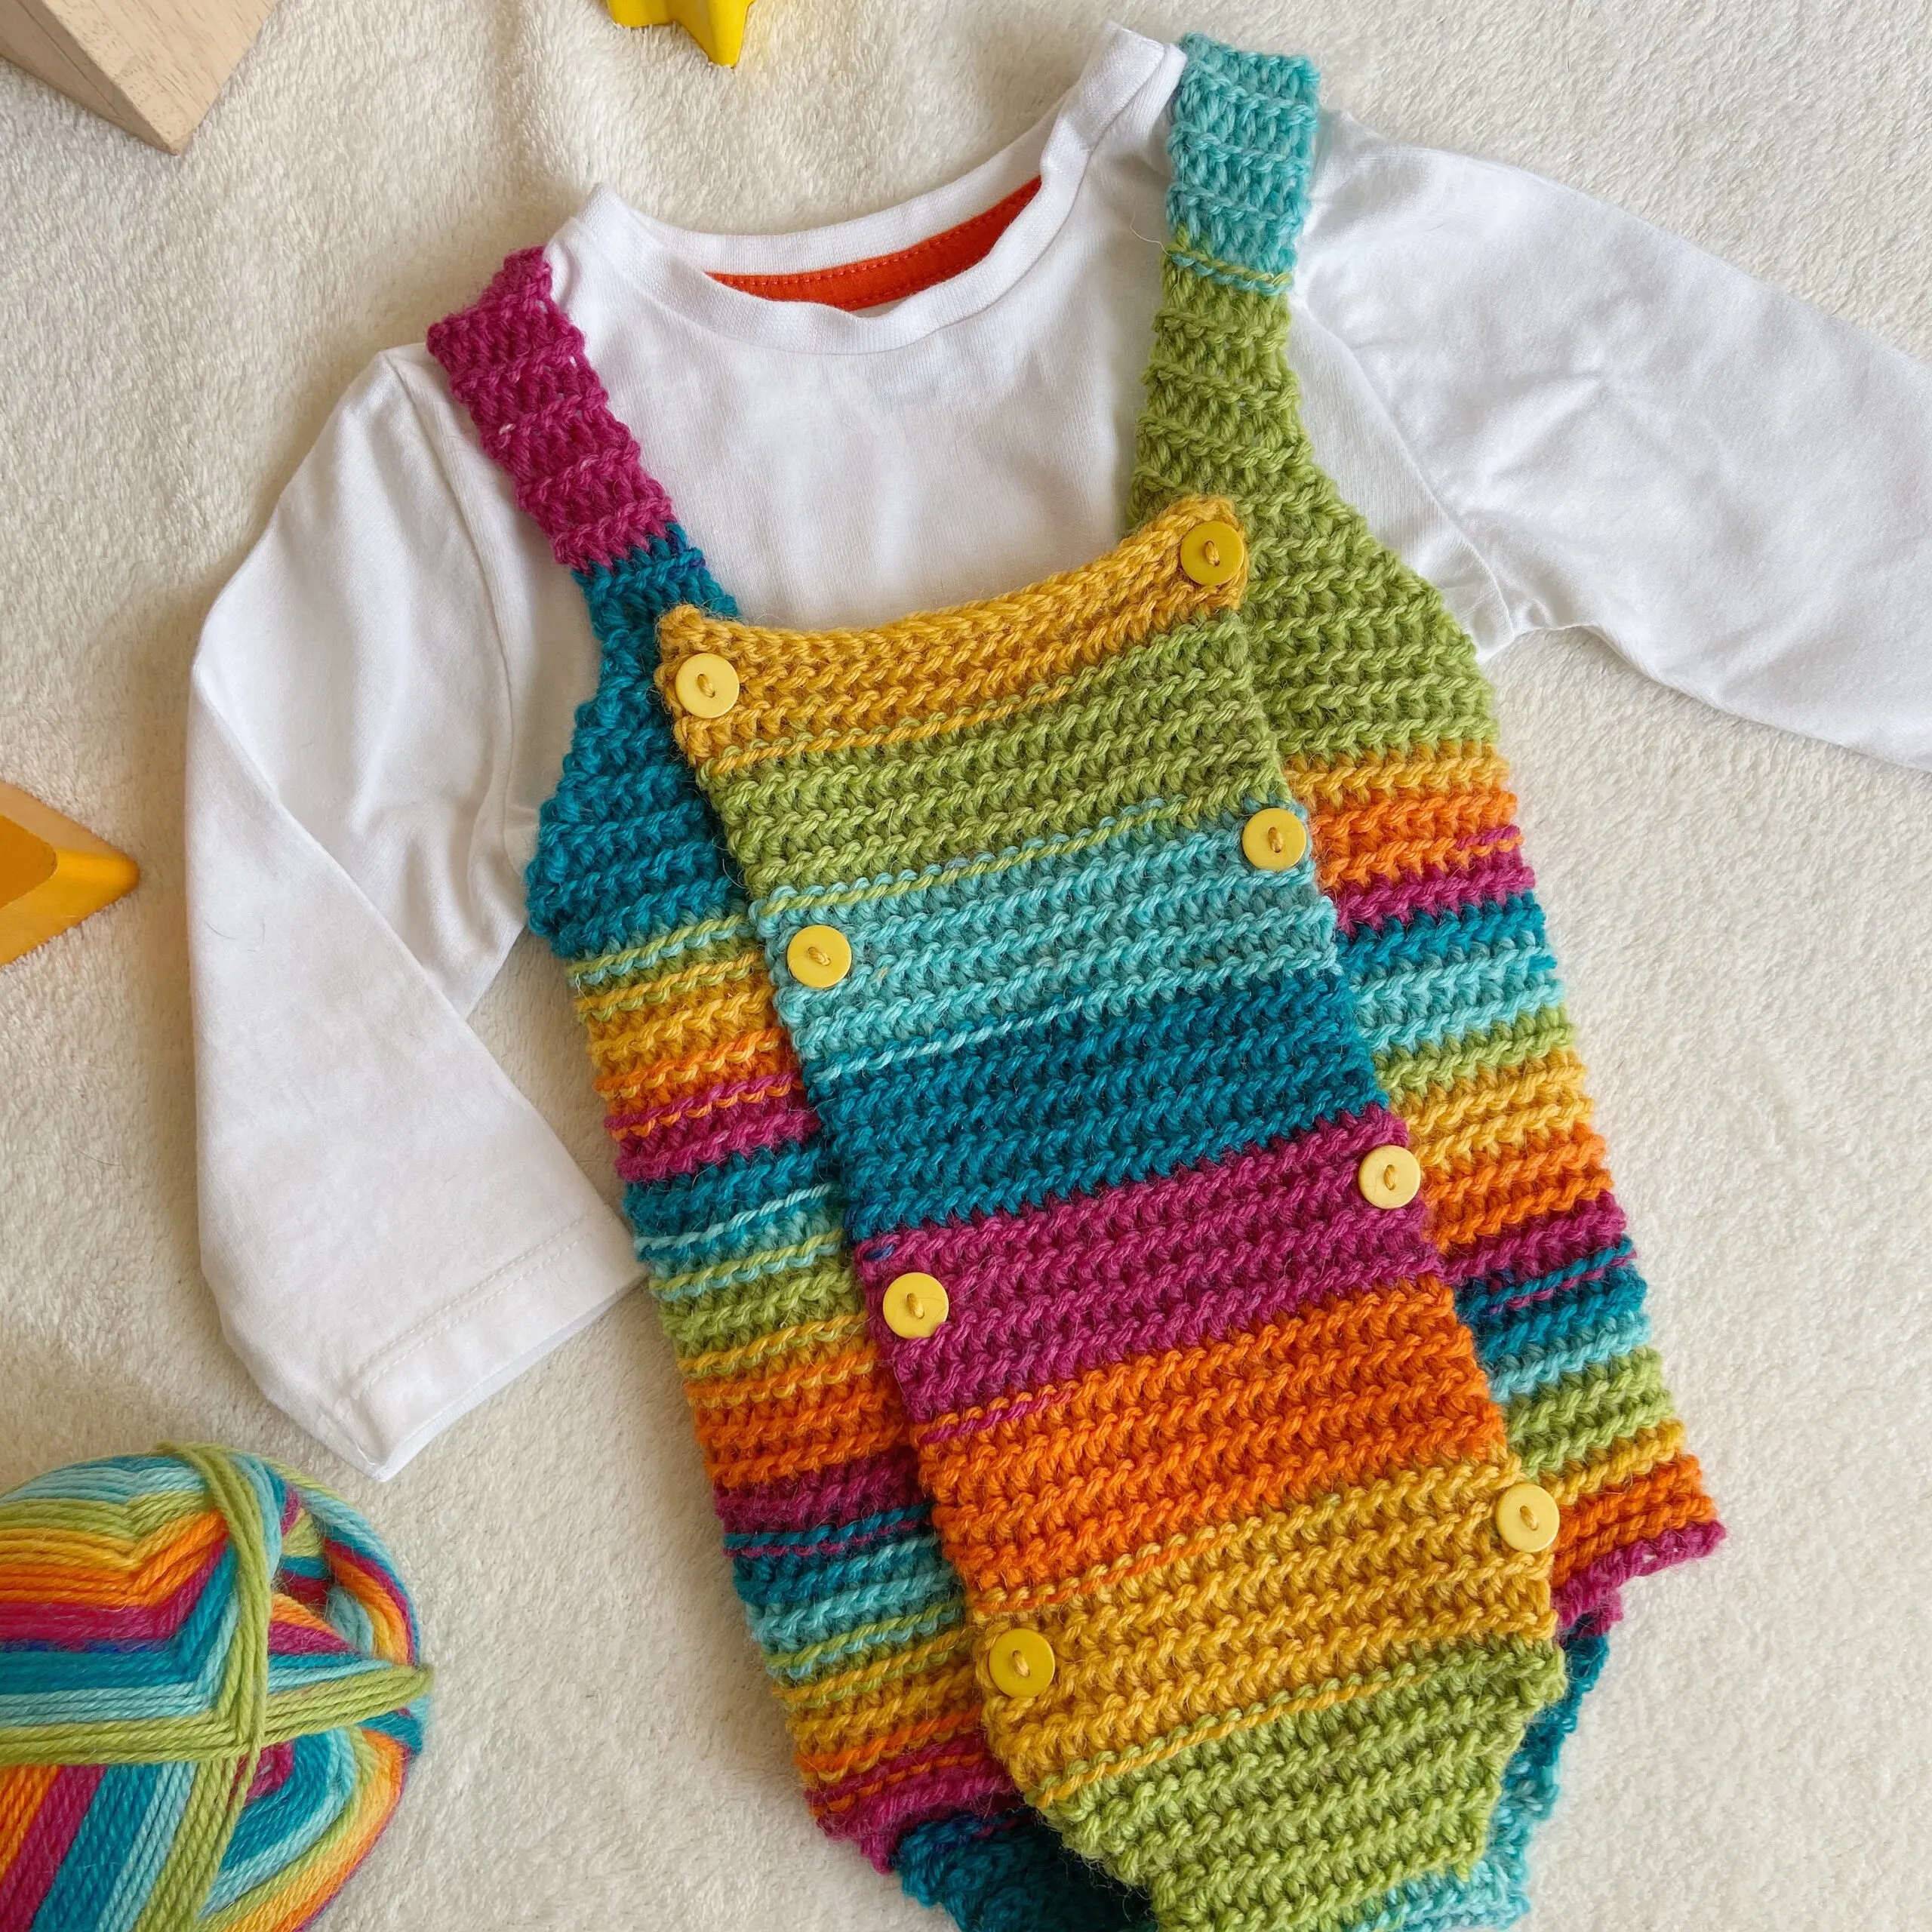 Rainbow baby crochet outfit with little yellow buttons.